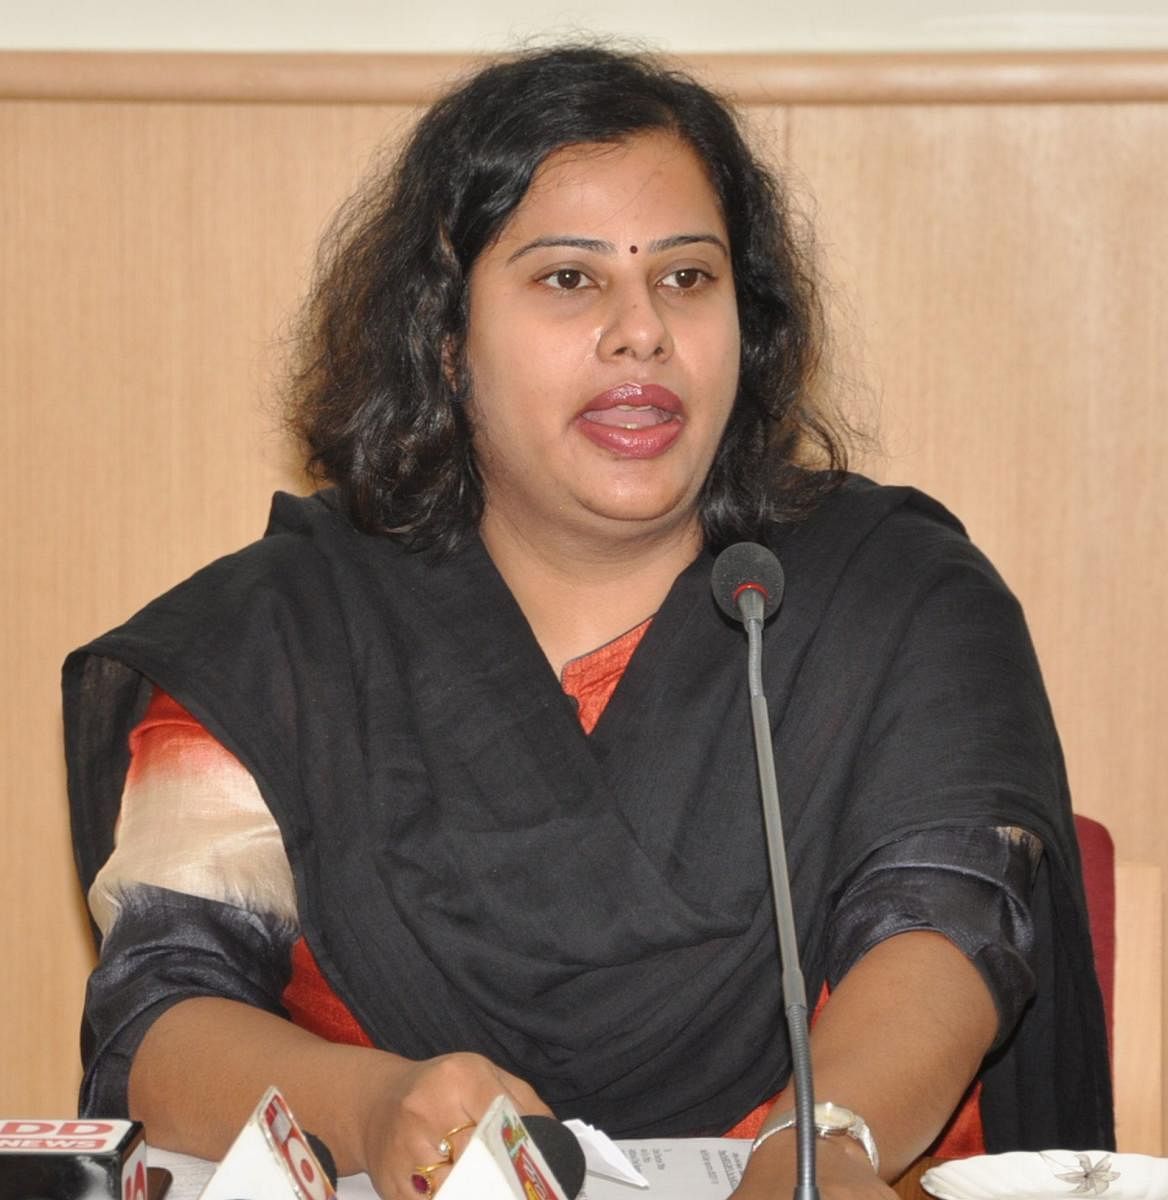 Deputy Commissioner N Manjushri, who is also the election officer, has lodged a complaint at Mandya West police station about receiving a threat call from an unidentified person on her mobile phone, here on Thursday.